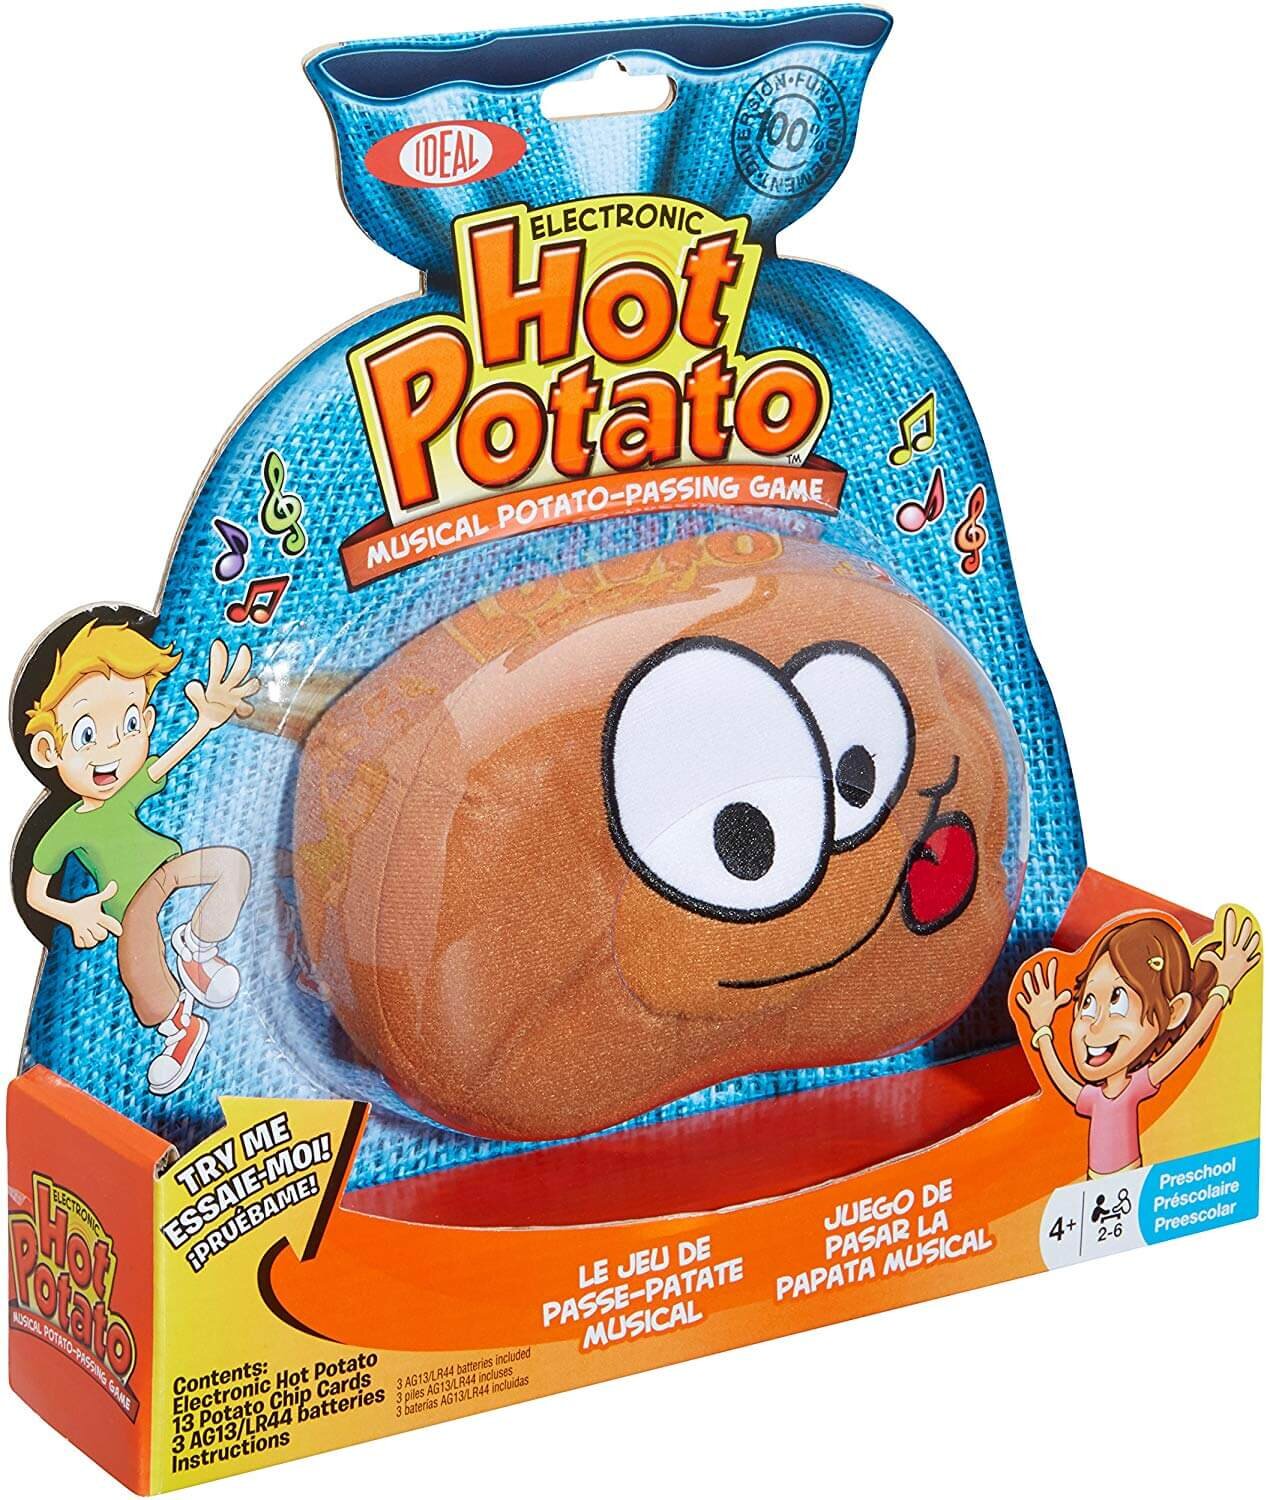 Ideal Hot Potato Electronic Musical Passing Game